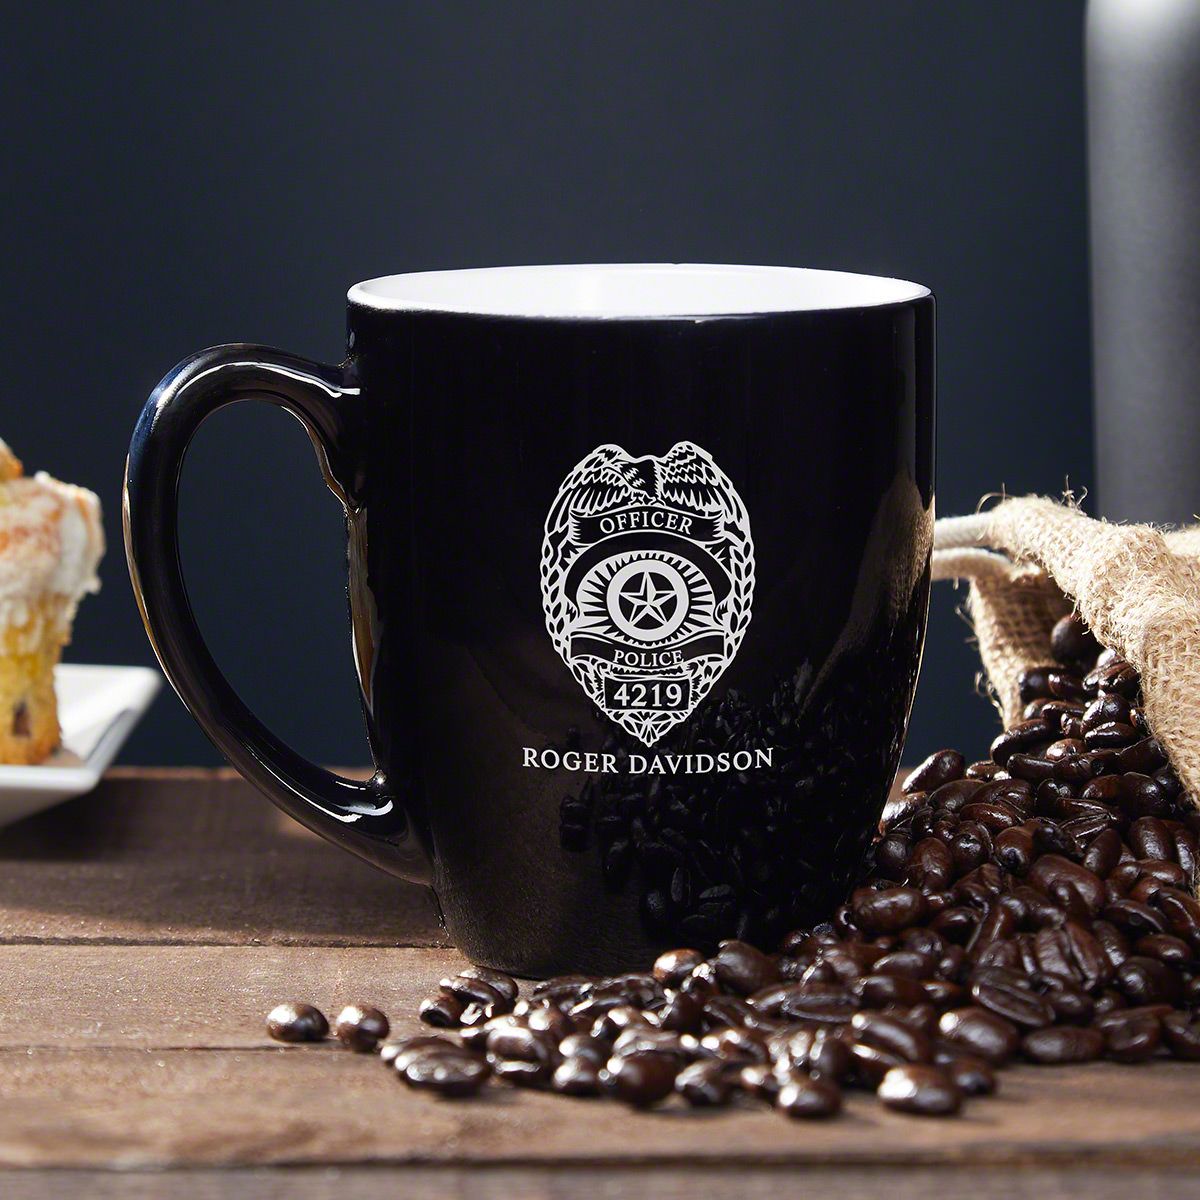 People We Face What You Gift Coffee Mug Police Fear M 0015 